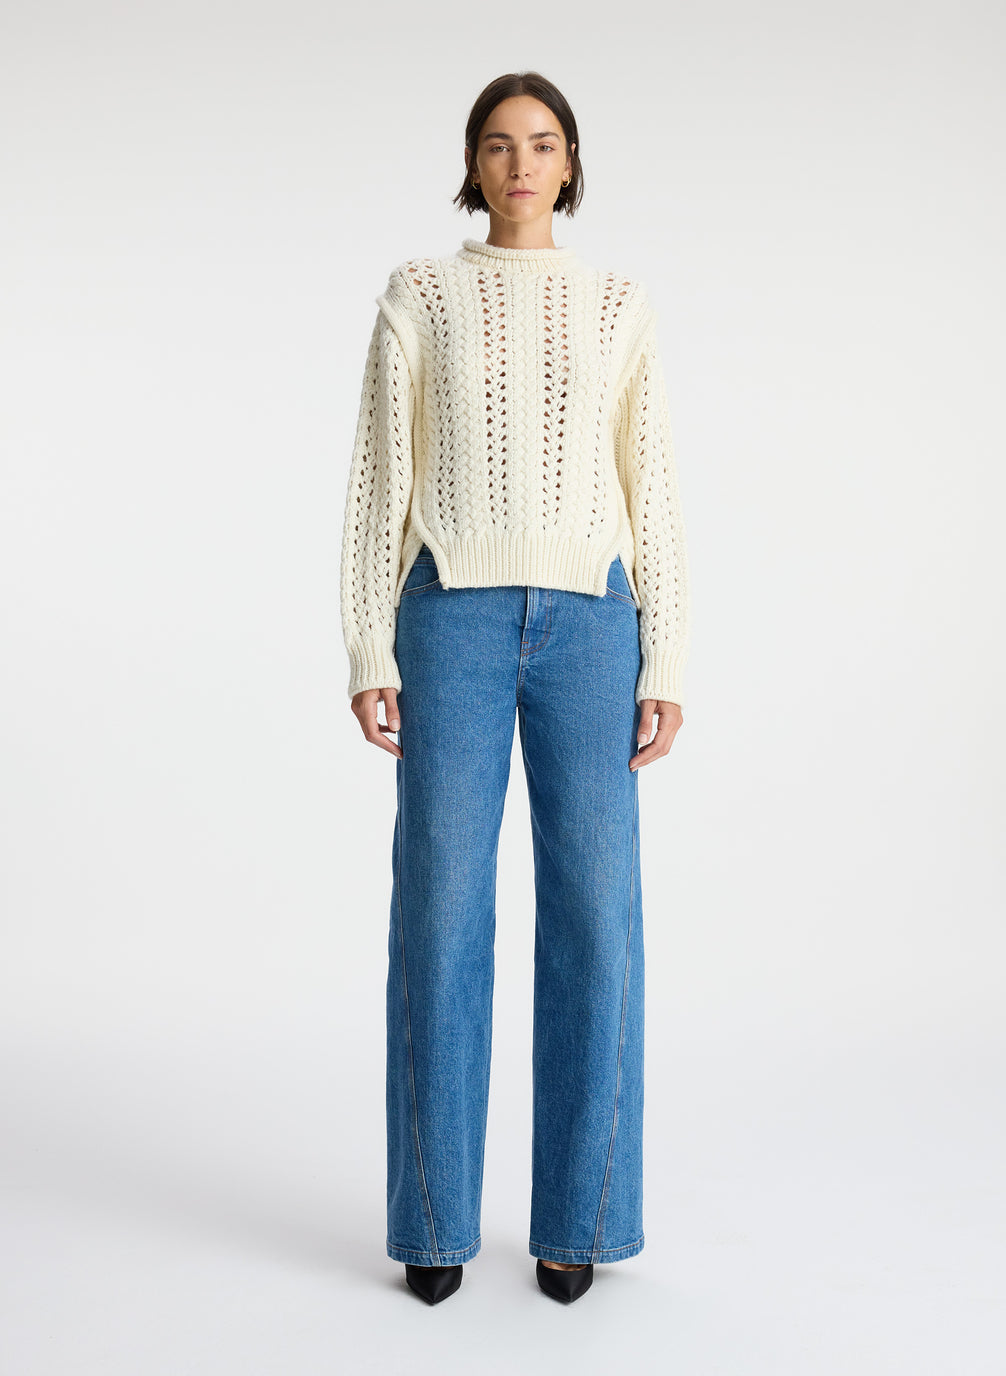 front view of woman wearing cream open knit sweater and medium wash denim jeans